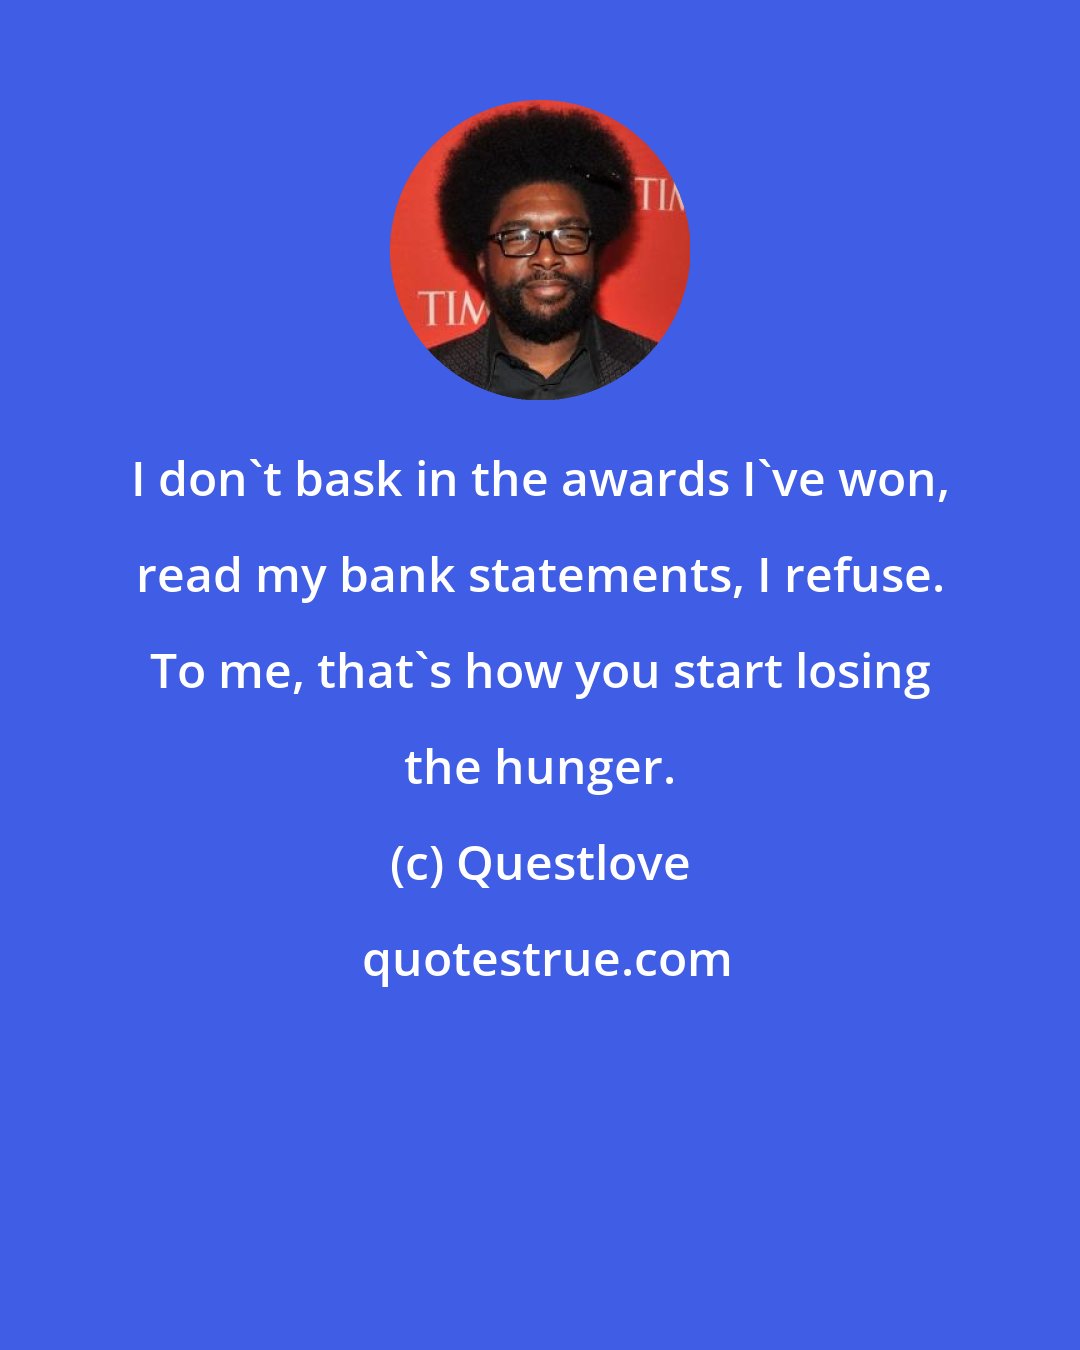 Questlove: I don't bask in the awards I've won, read my bank statements, I refuse. To me, that's how you start losing the hunger.